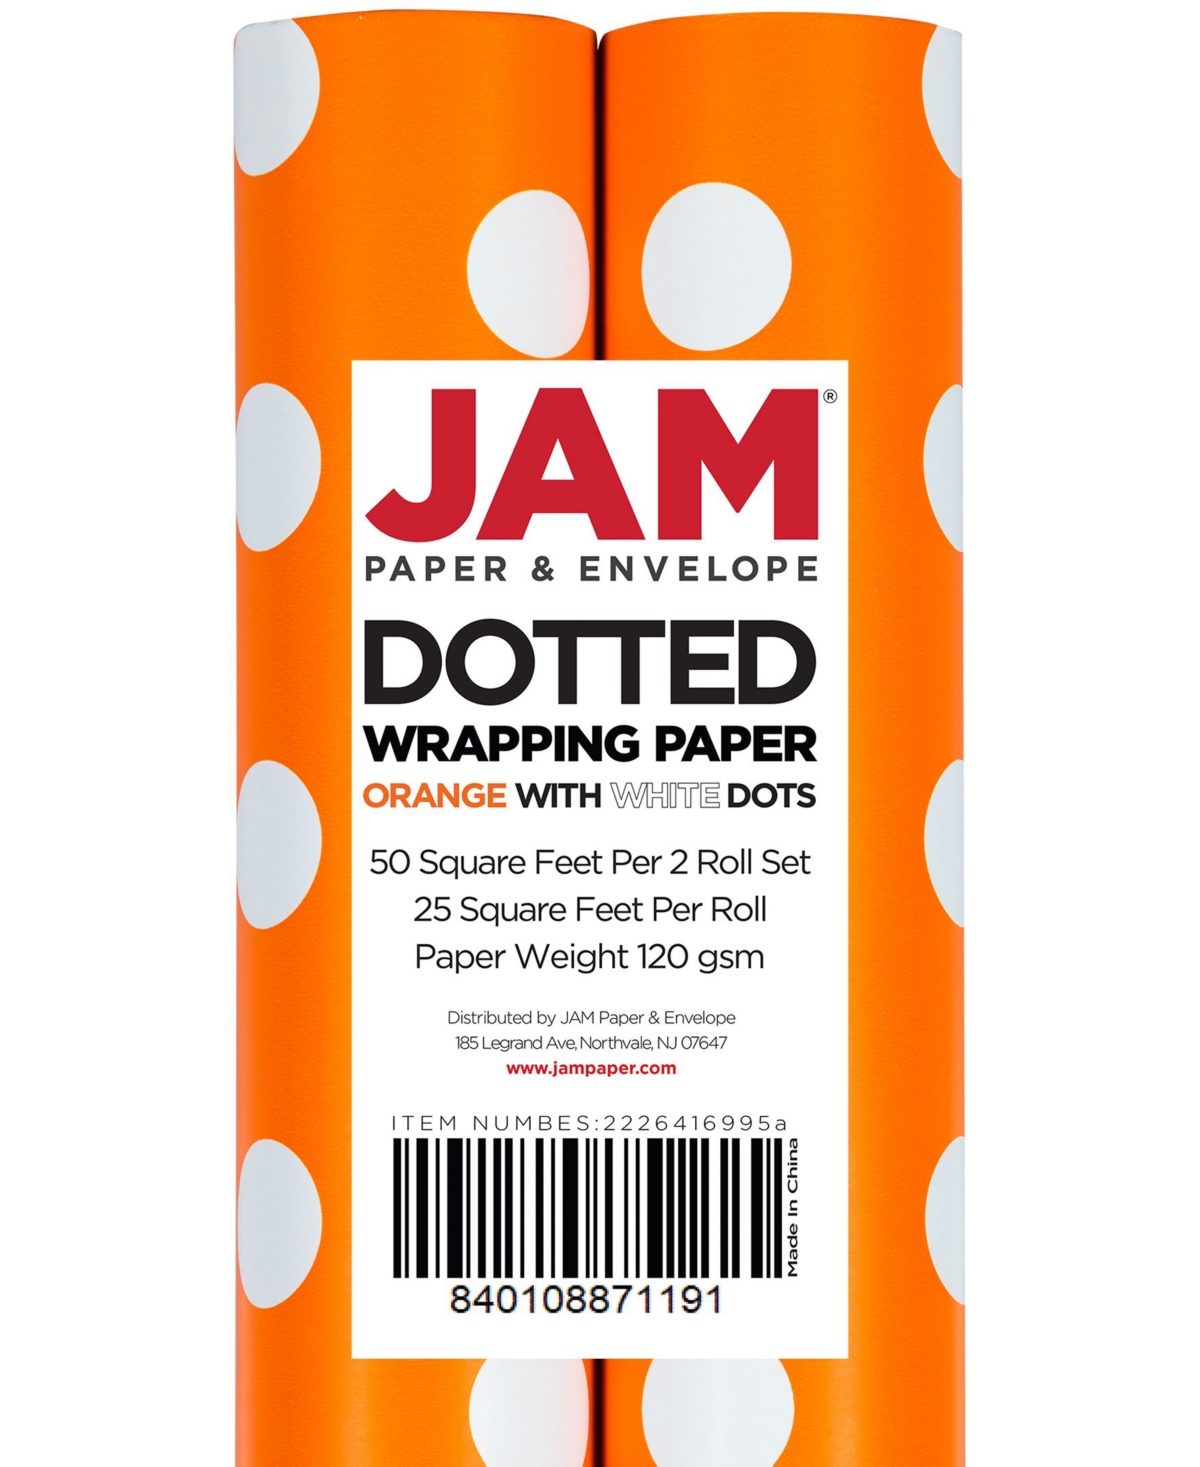 Jam Paper 25 Square Feet Wrapping Paper Rolls, Pack Of 2 In Orange,white